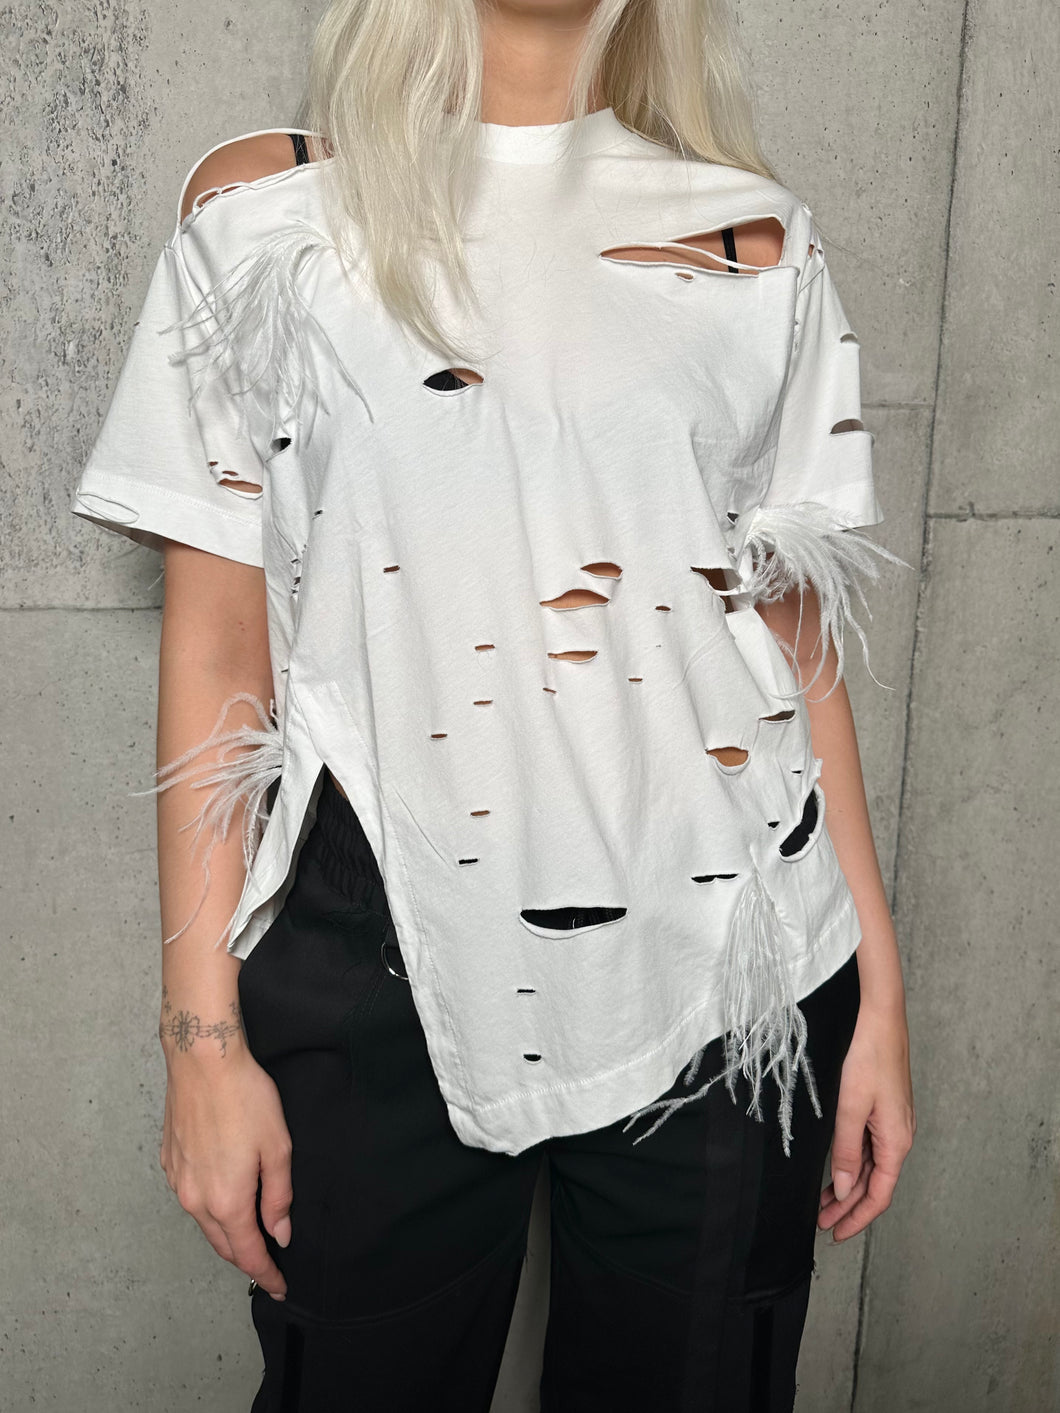 Distressed T-Shirt With Feathers